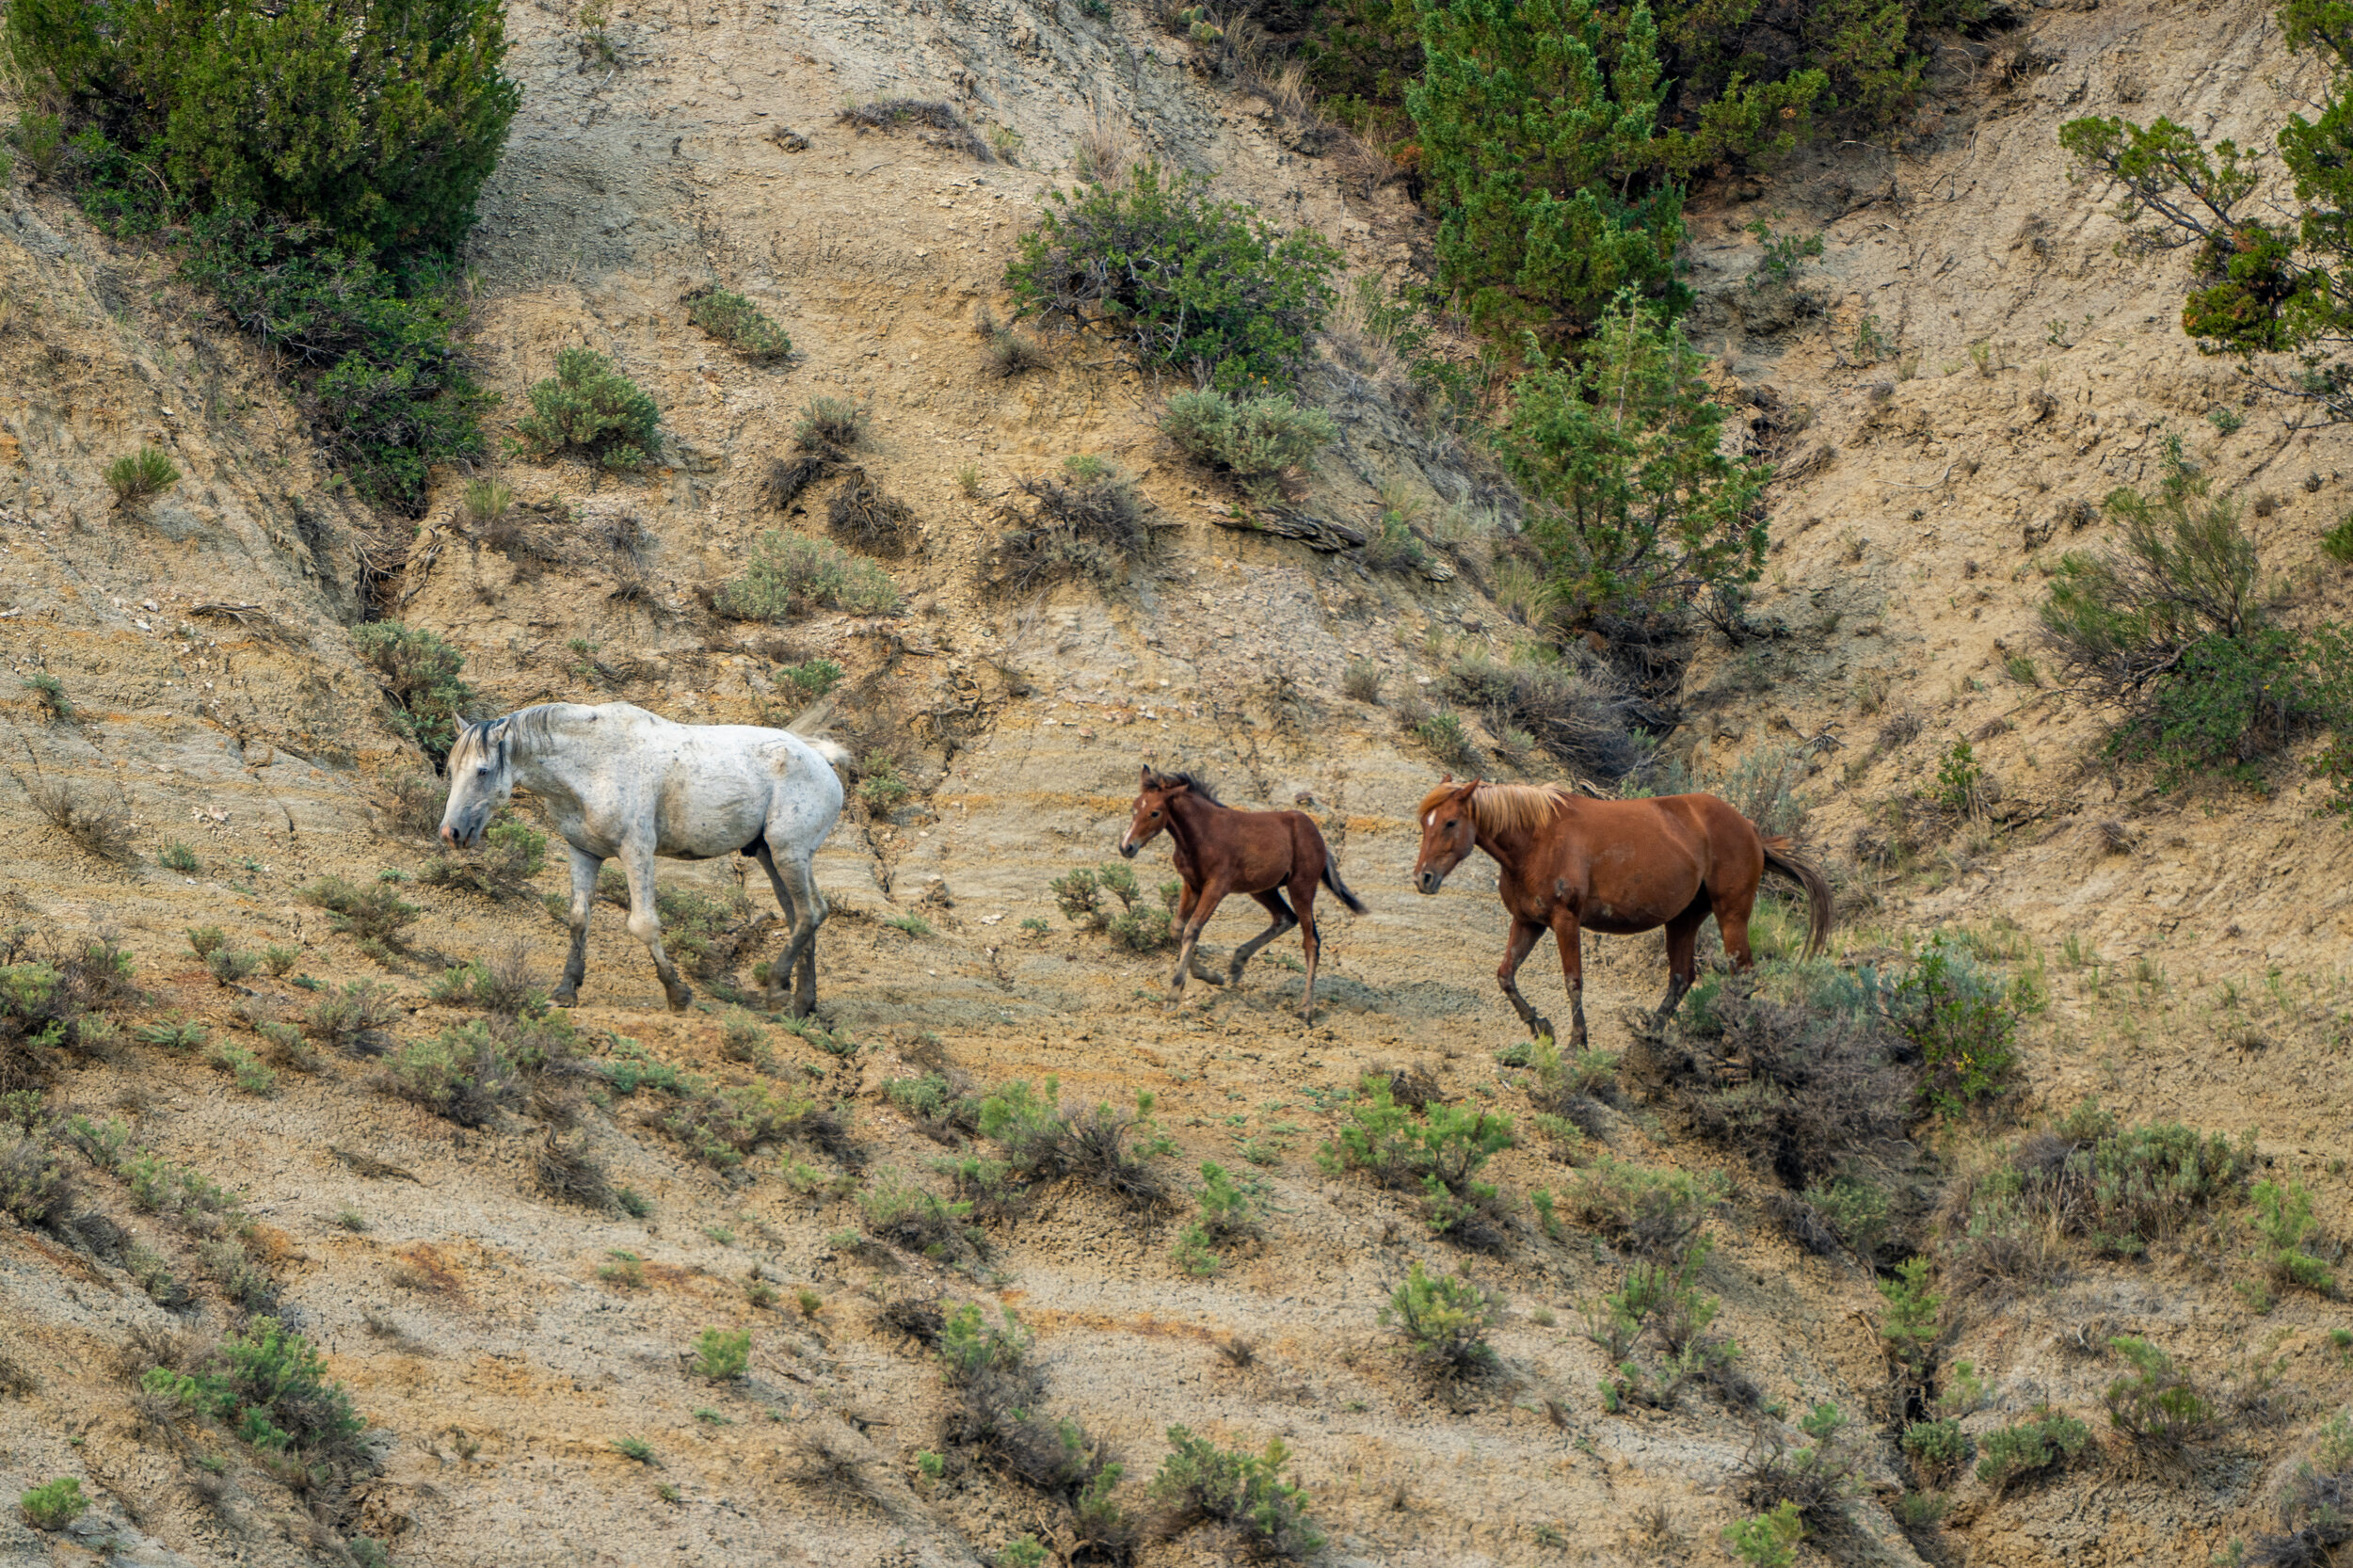  &nbsp;Wildlife is abundant at Roosevelt Park. Our first evening here, we spotted this wild horse family taking a walk  in the badlands.  